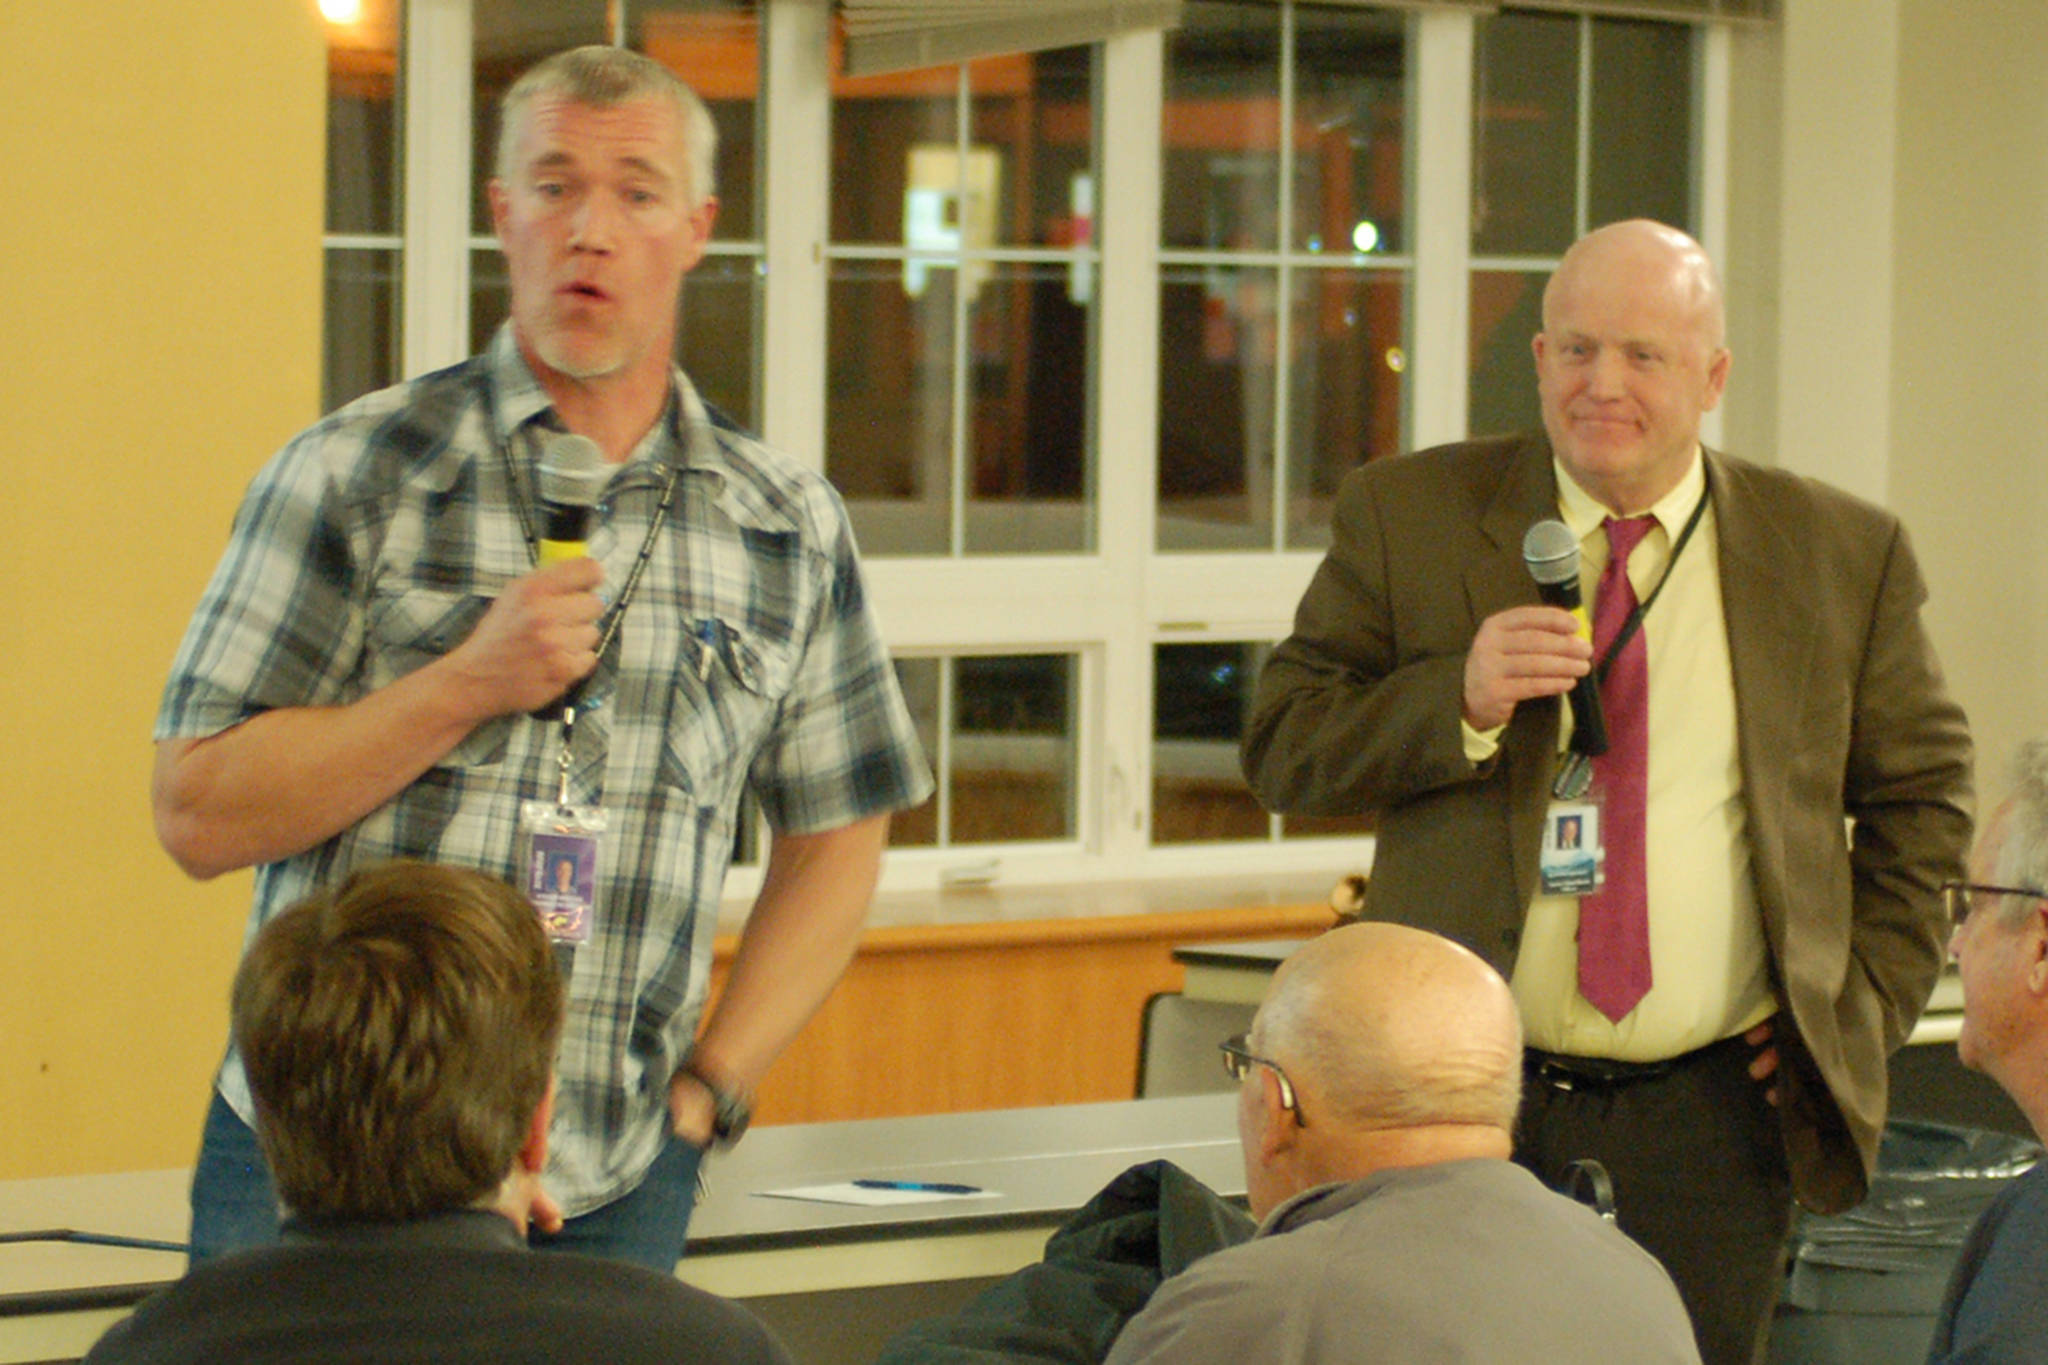 Sequim High School career & technical education director Steve Mahitka, left, and Sequim School District interim superintendent Rob Clark, right, address the audience during a question and answer segment of the SHS CTE forum on Dec. 3 to introduce the Skillmation program the district will soon be using. Sequim Gazette photo by Conor Dowley